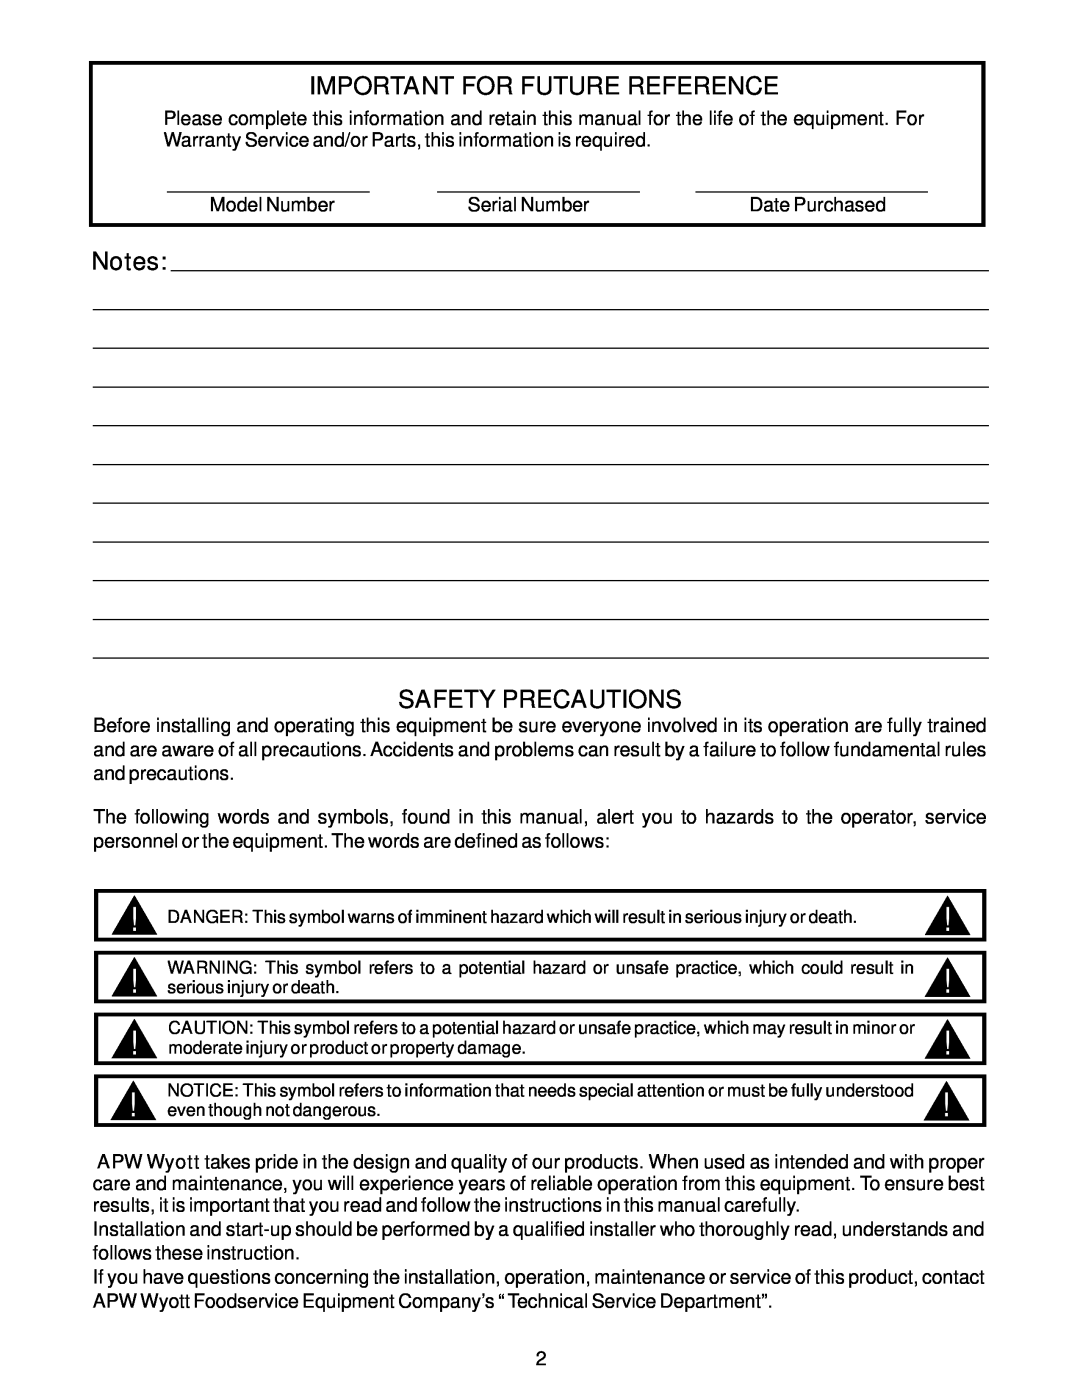 APW Wyott FT 800H operating instructions Important For Future Reference, Notes SAFETY PRECAUTIONS 